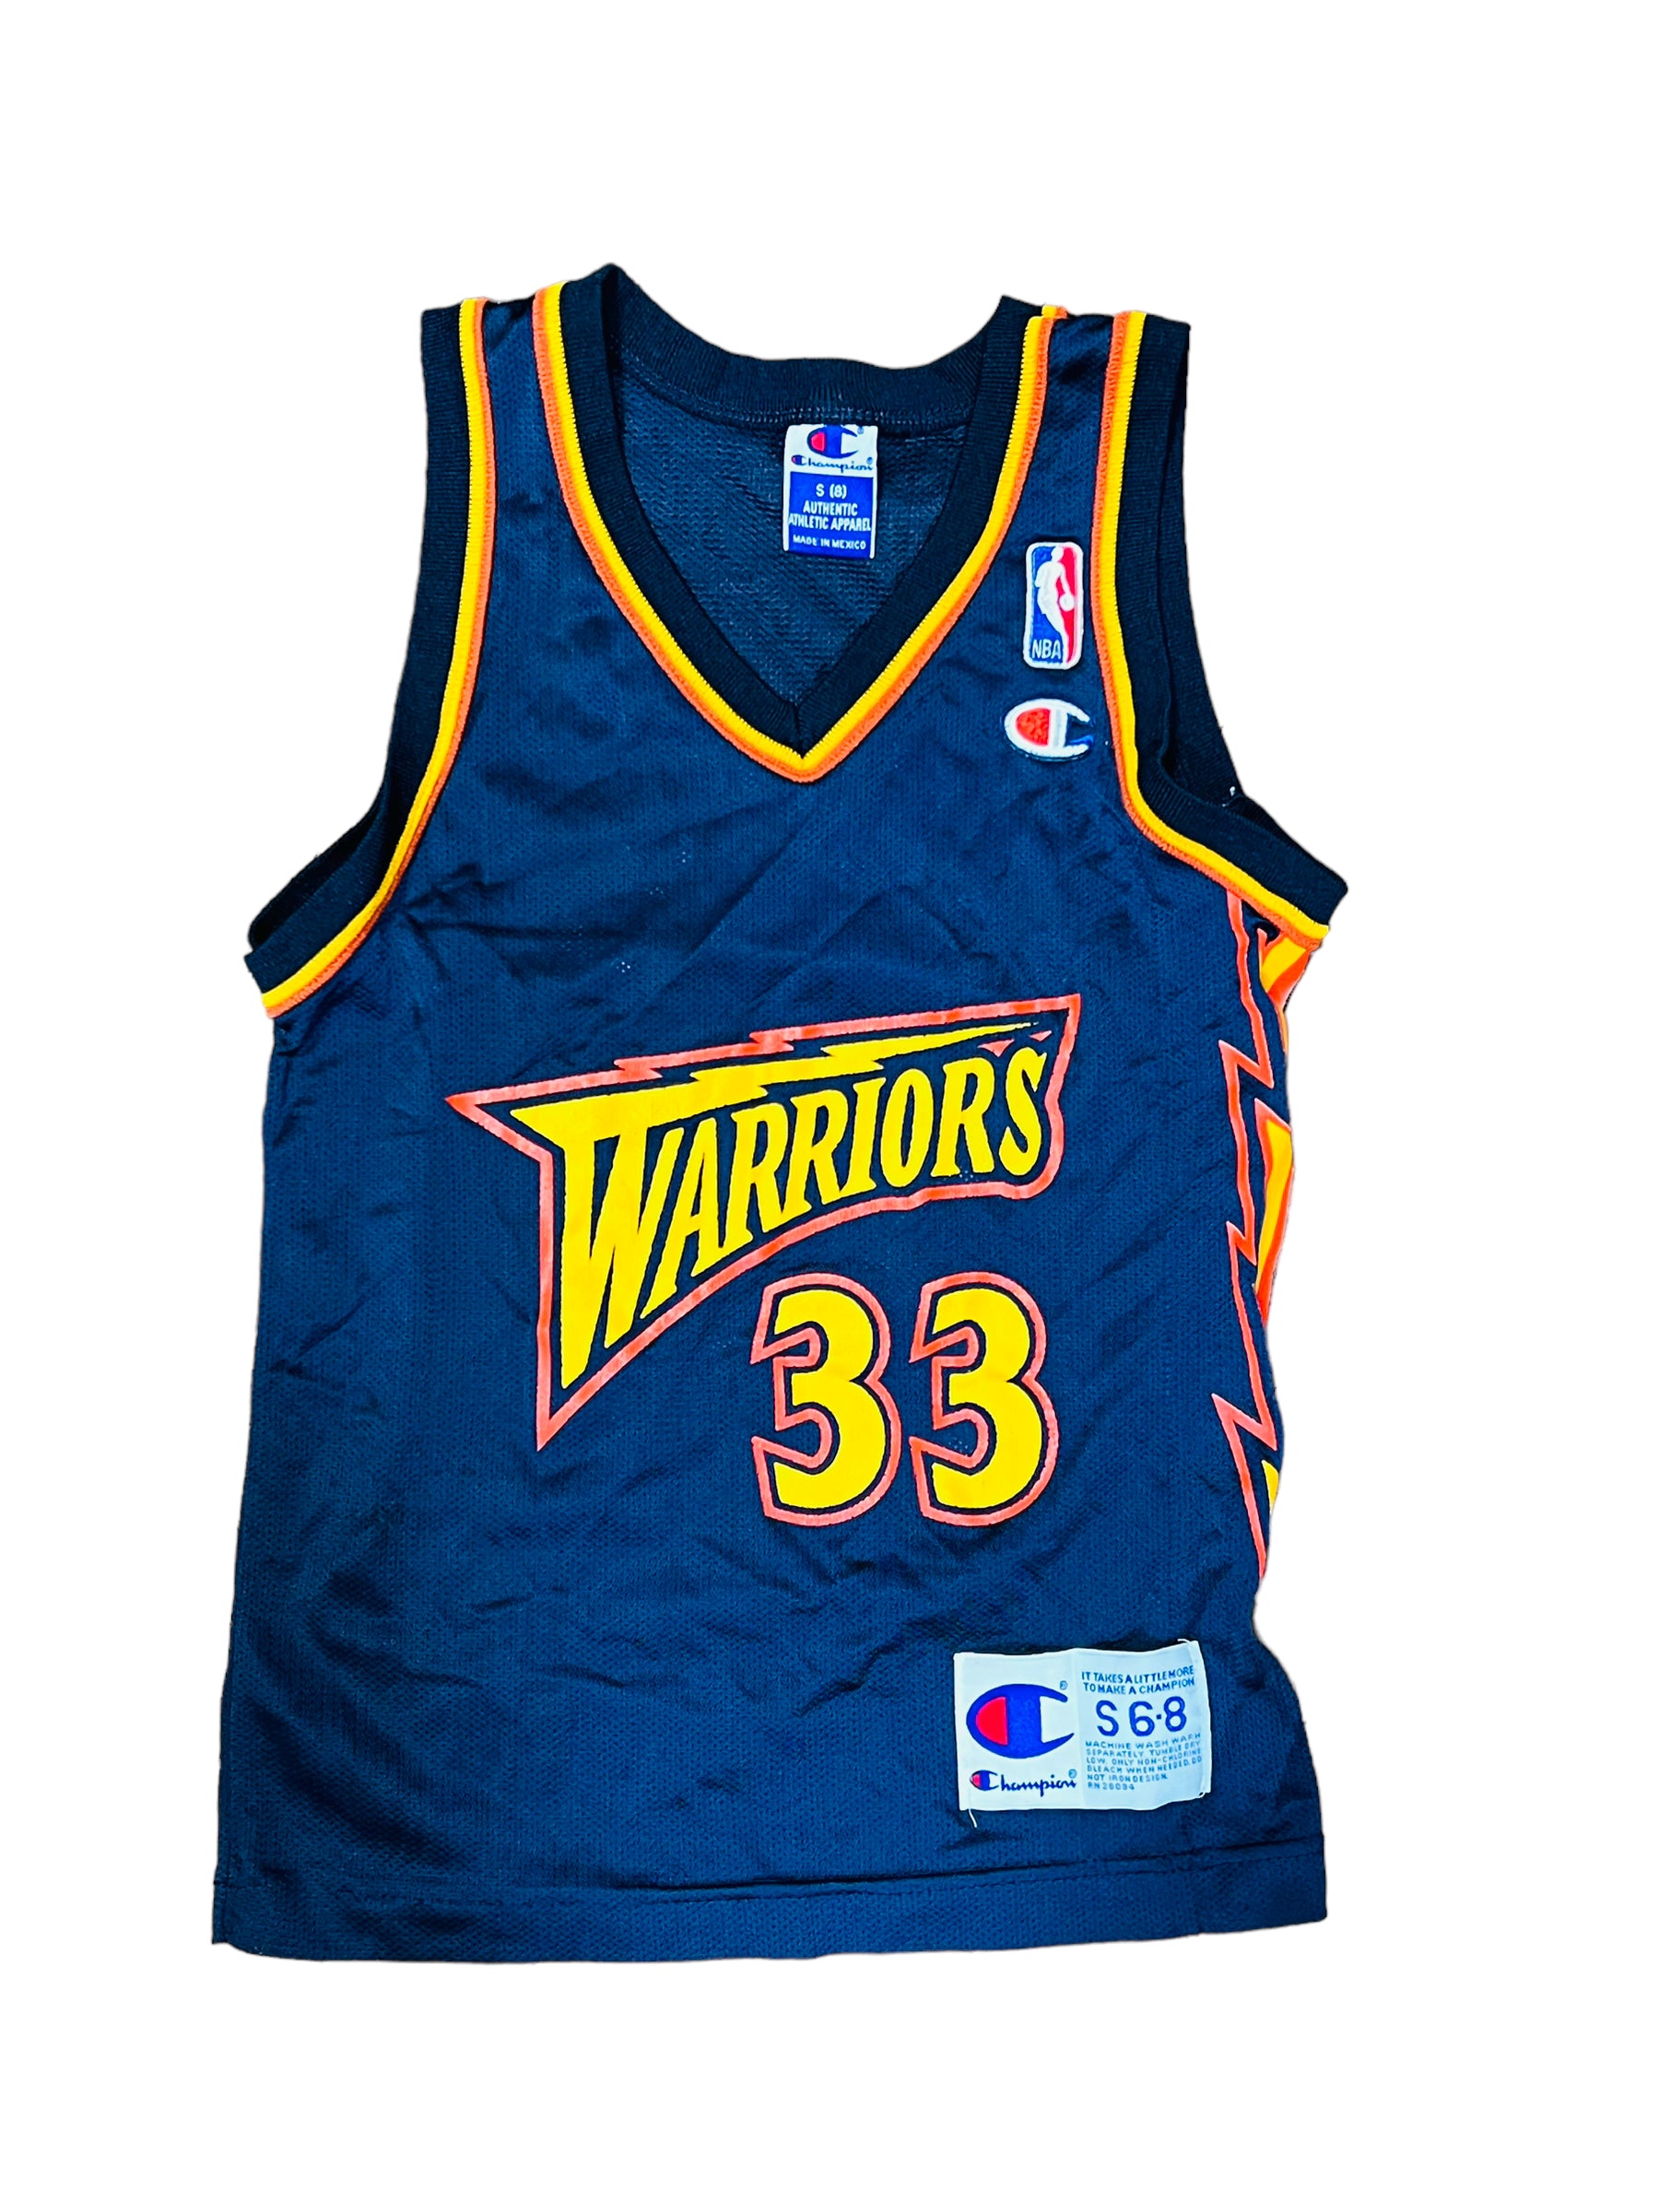 Best Golden State Warriors gifts: Jerseys, hats and more